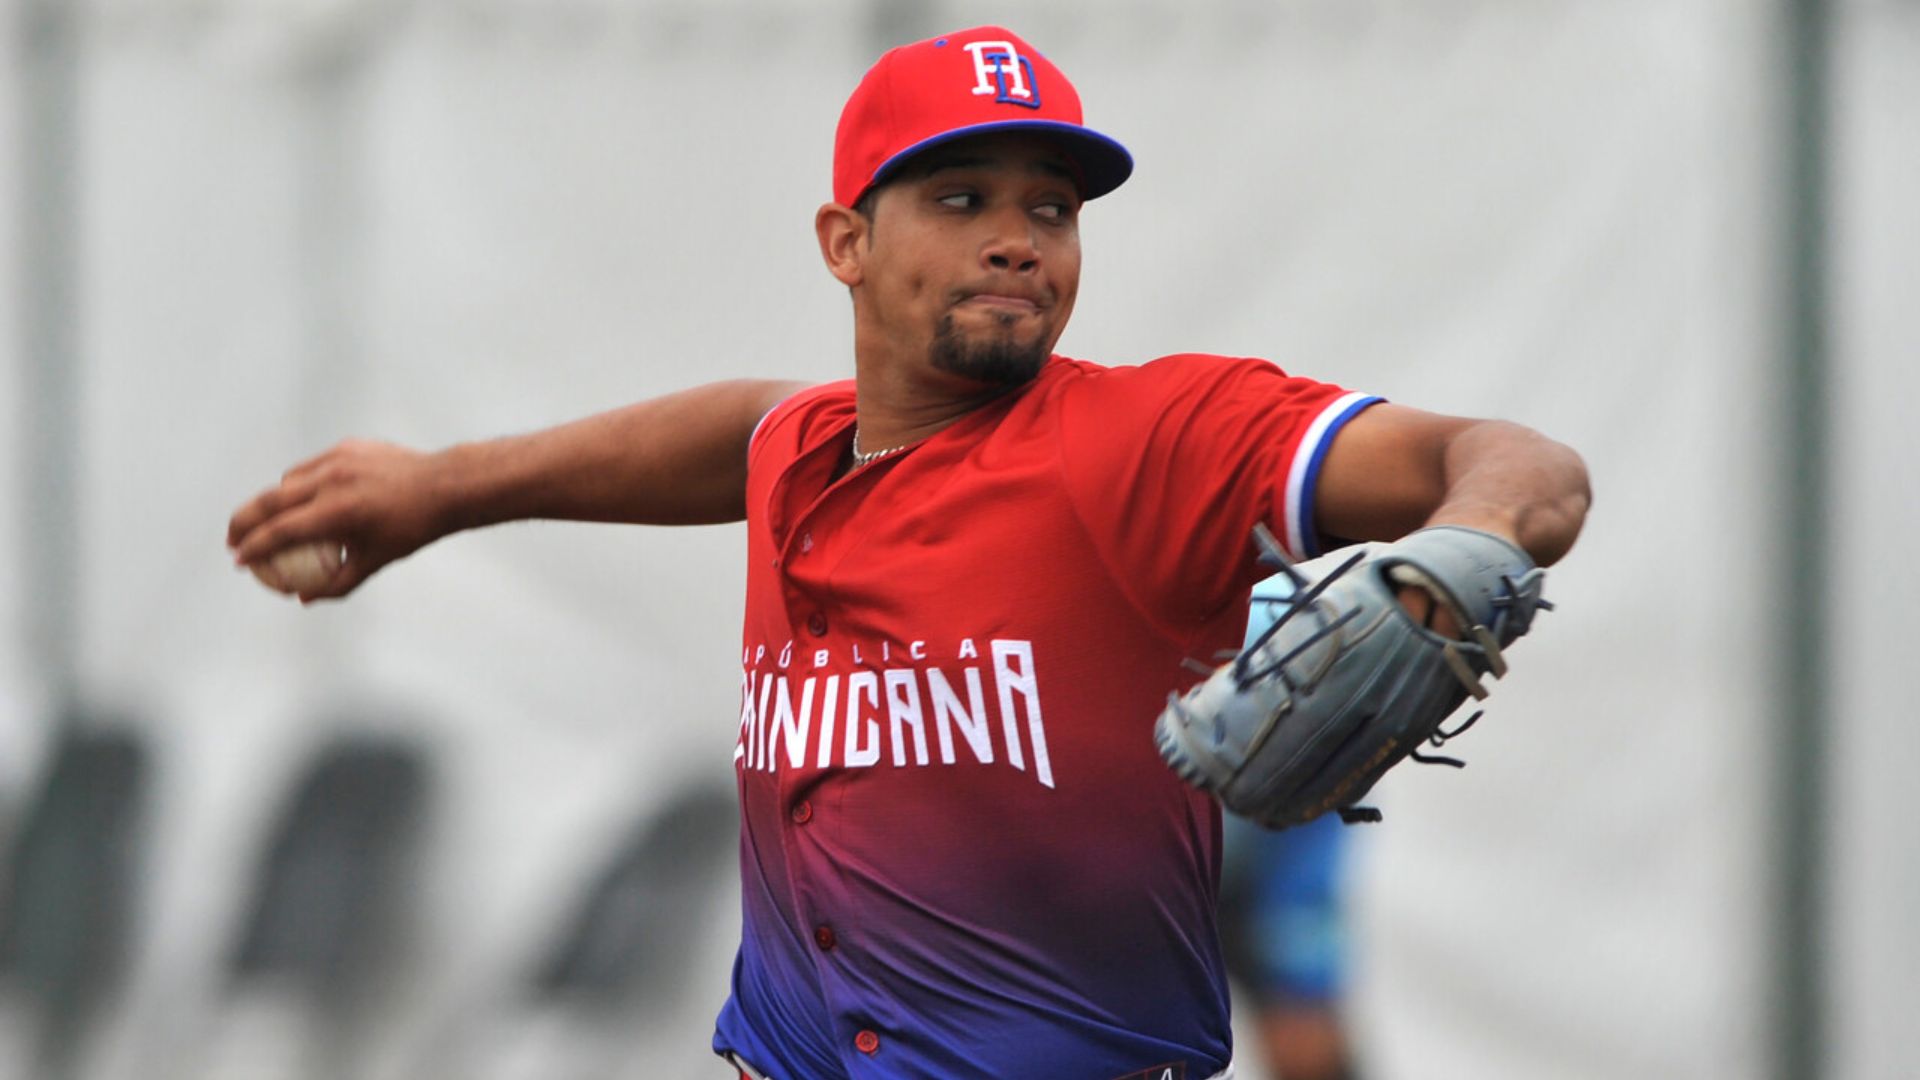 Baseball: Dominican Republic defeats Chile 12-2, to compete for 5th place